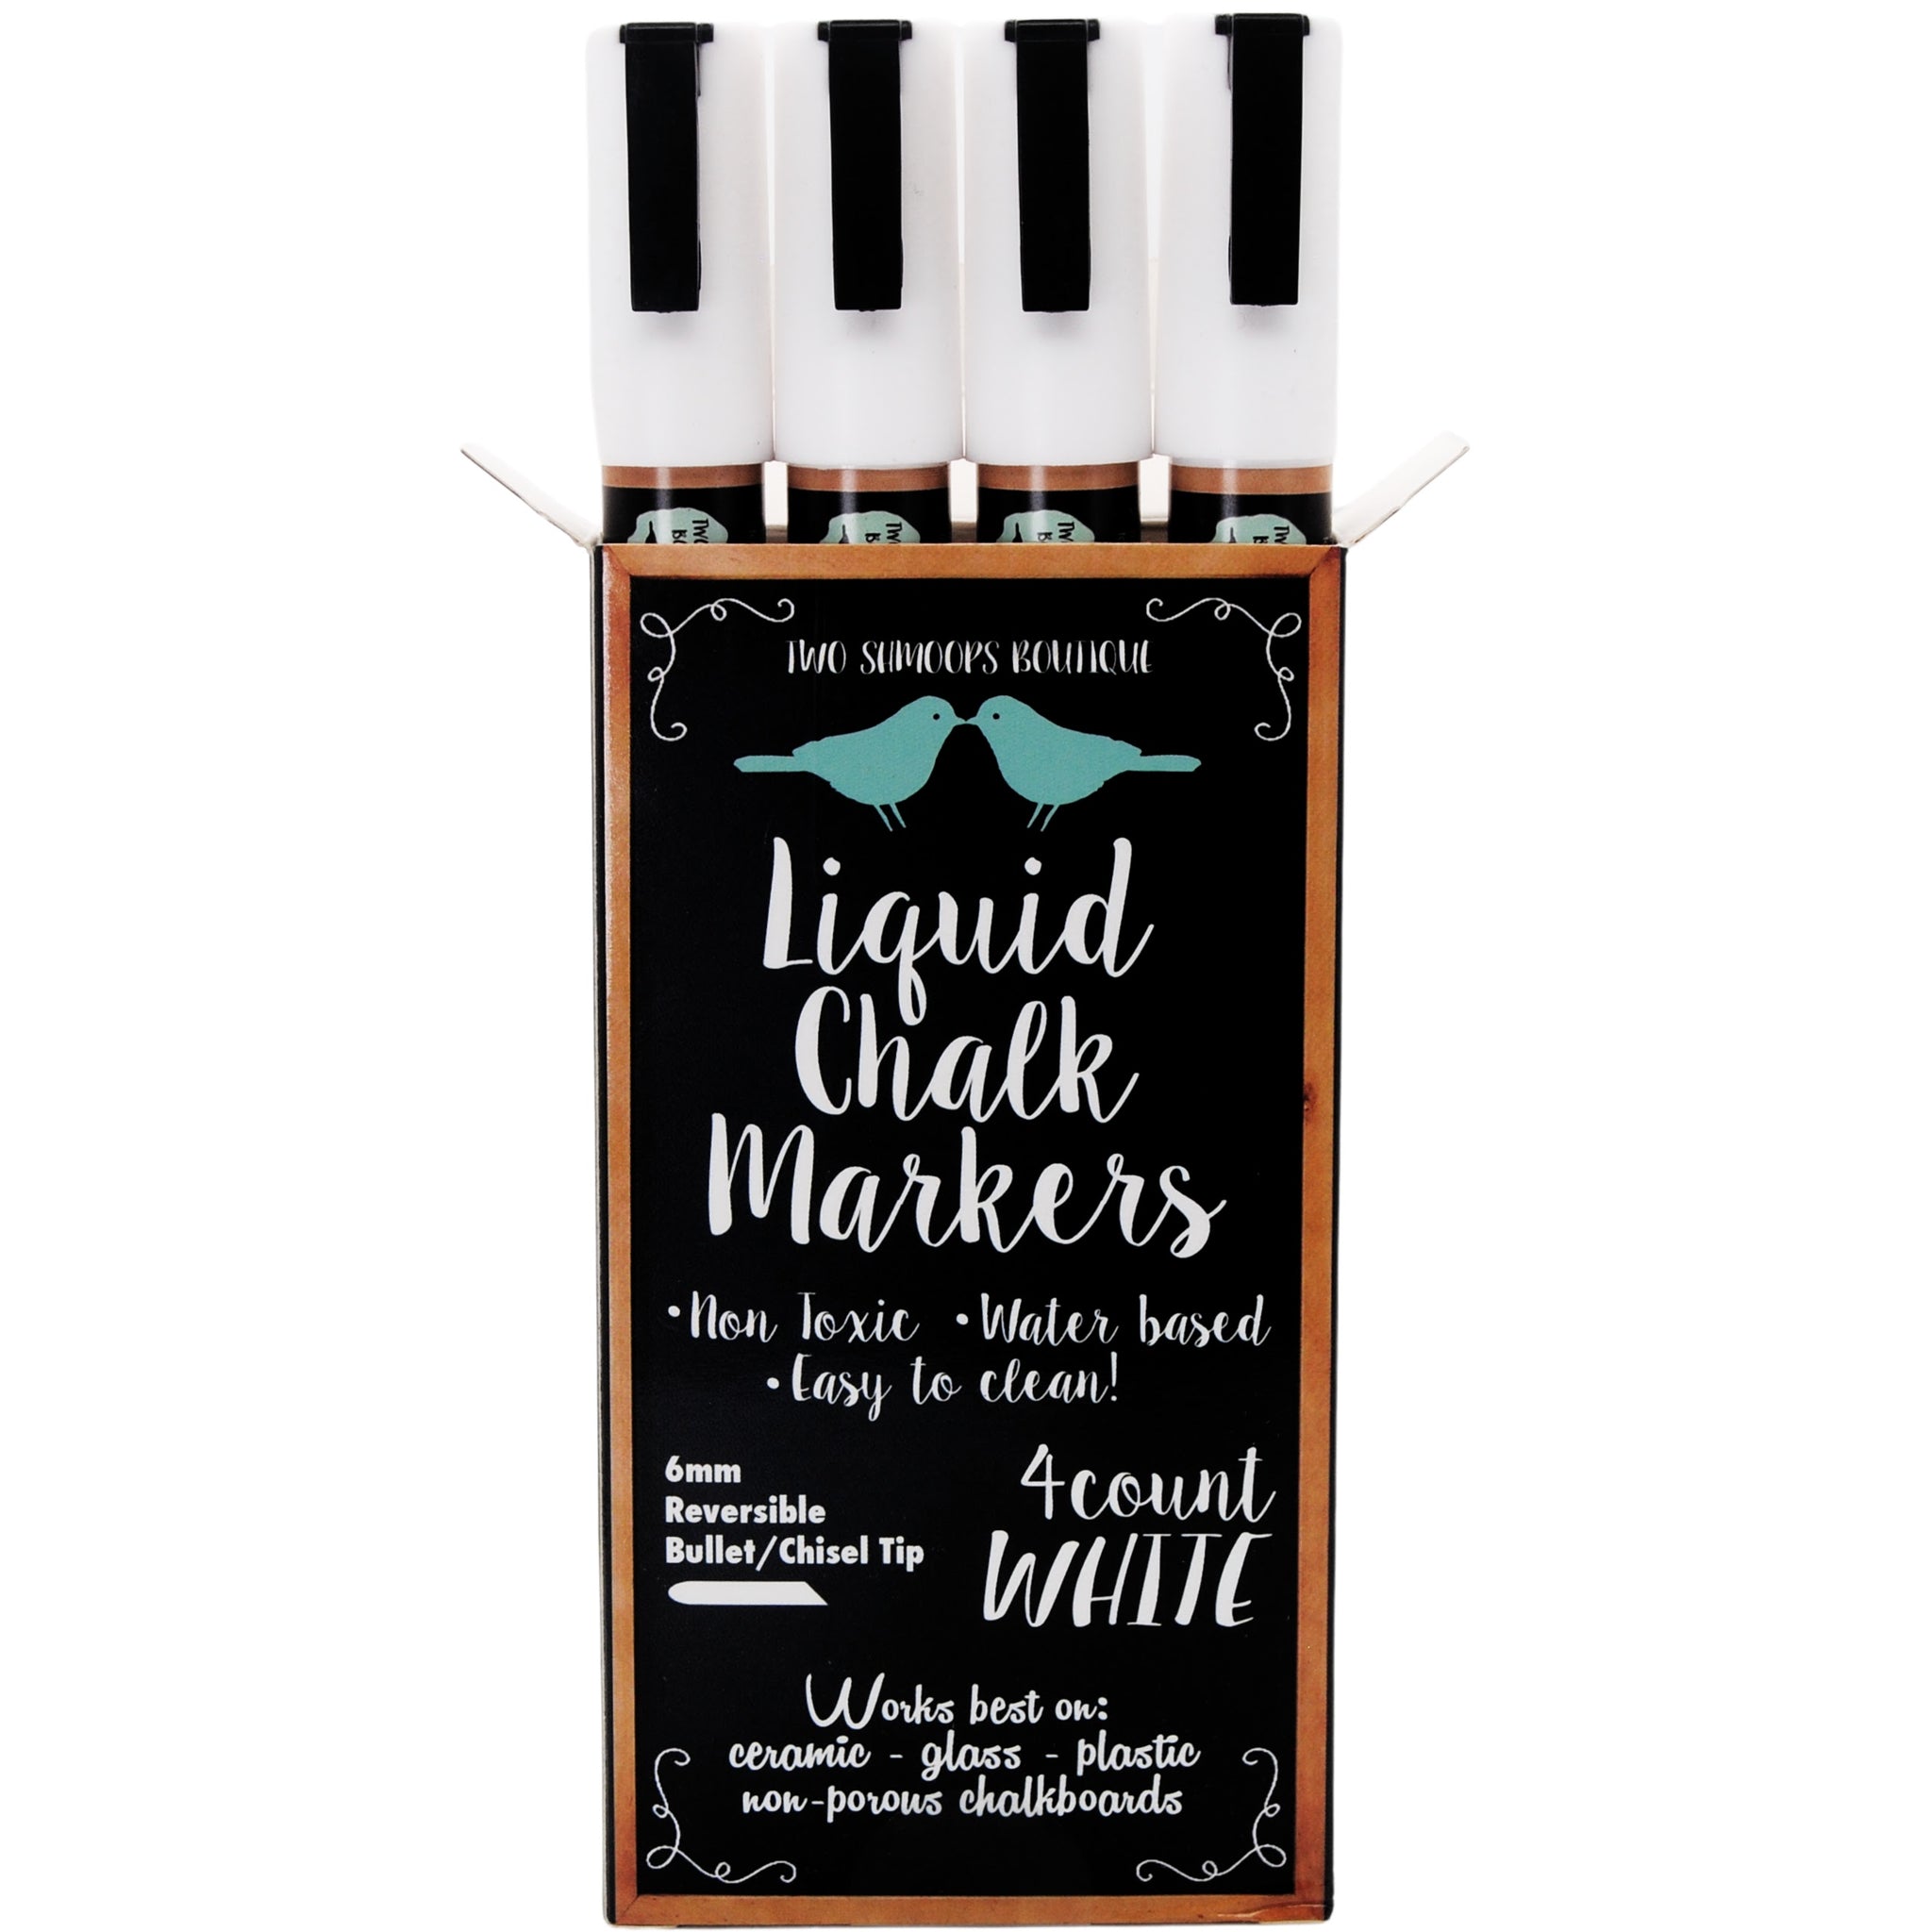 Liquid Chalk Markers - Pack of 4 White Chalk Pens